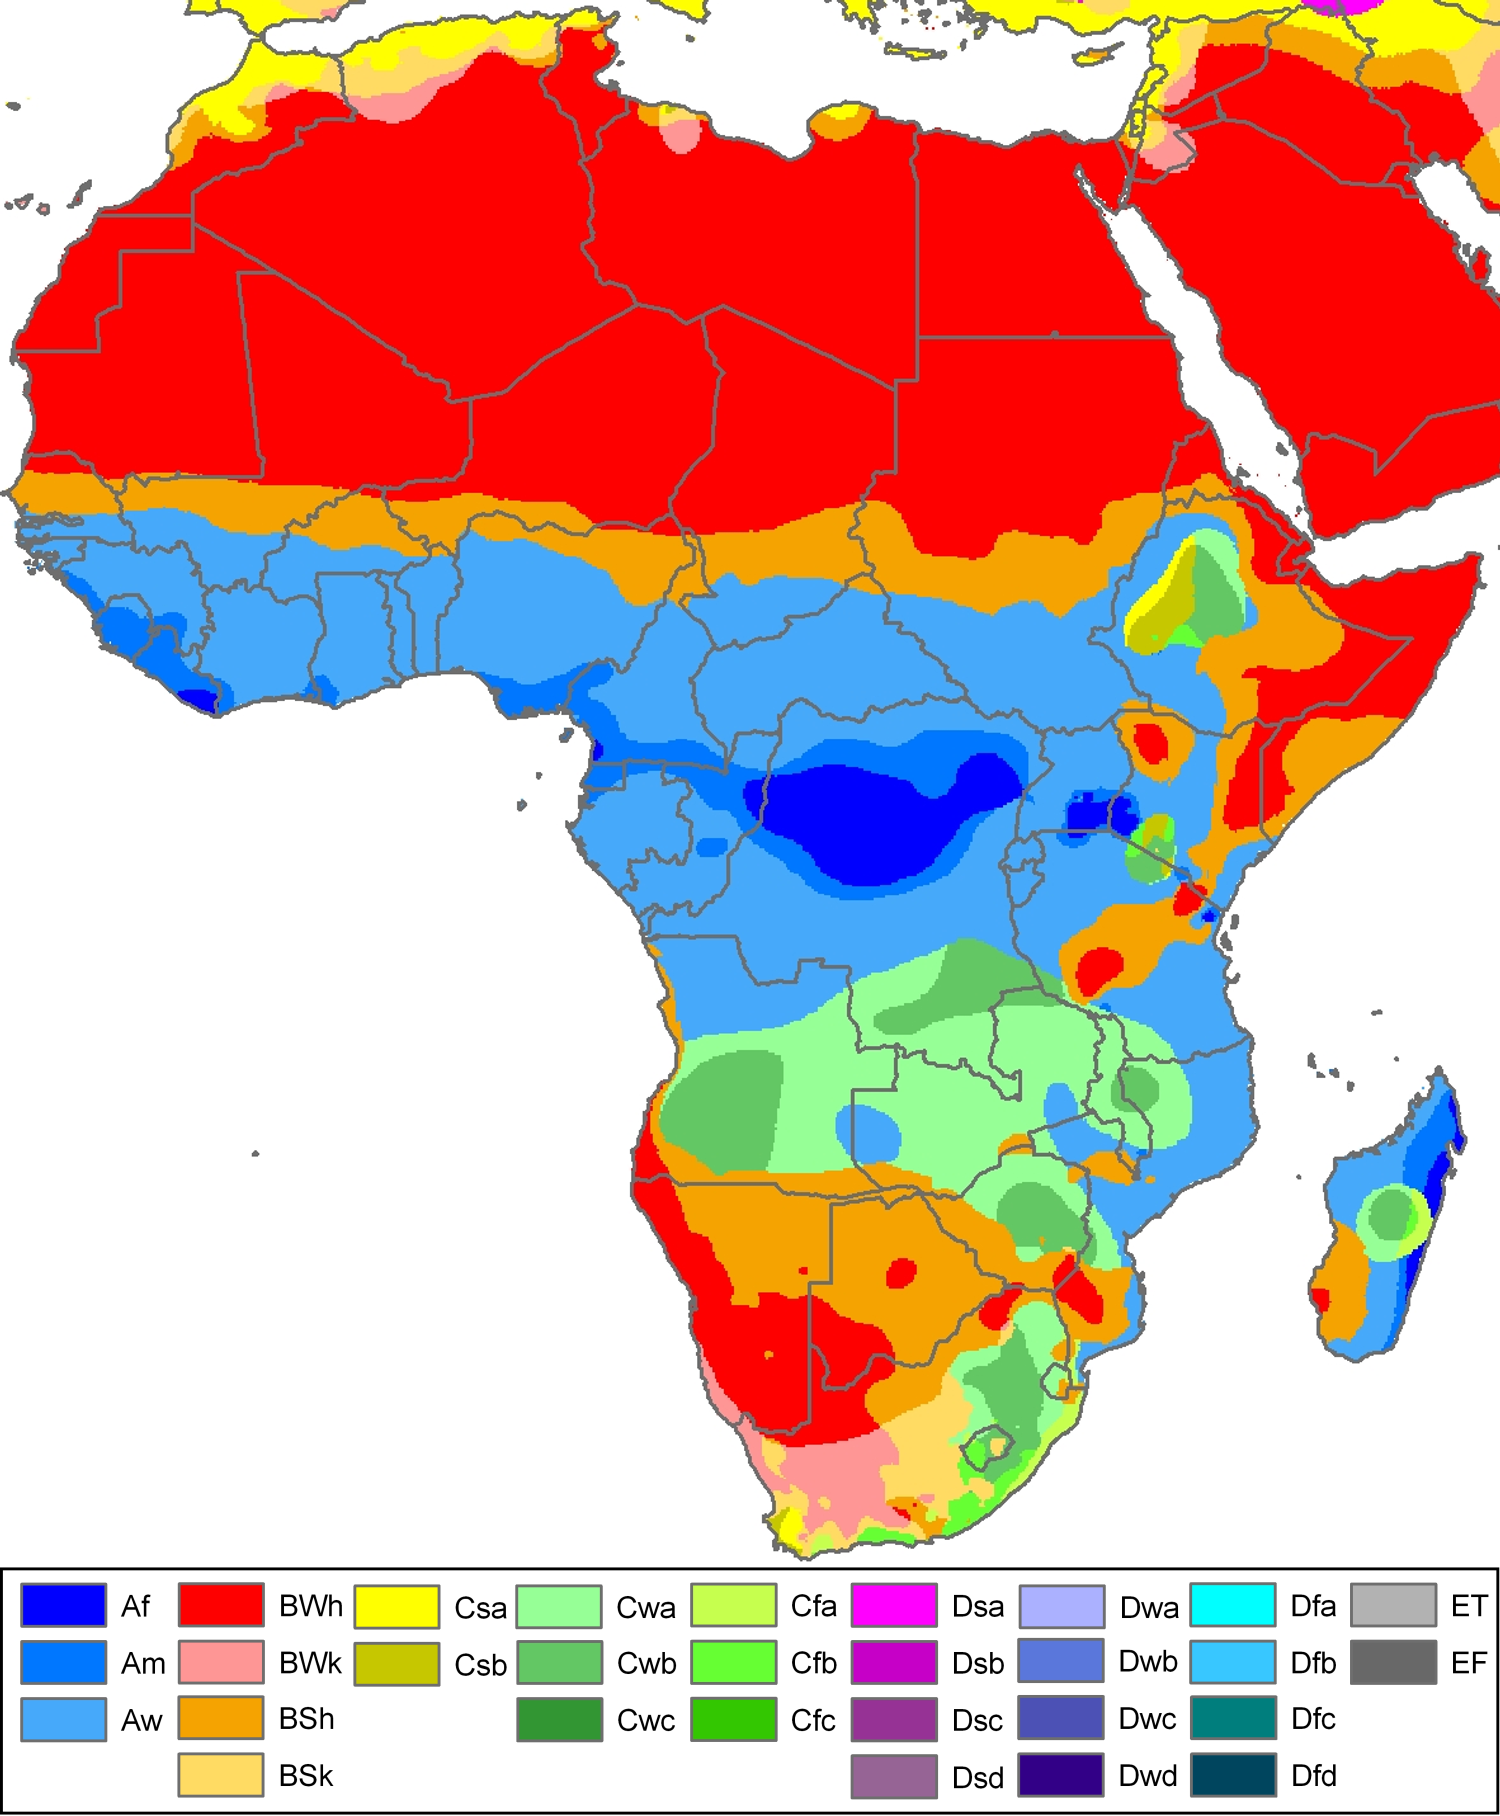 Africa Climate Map